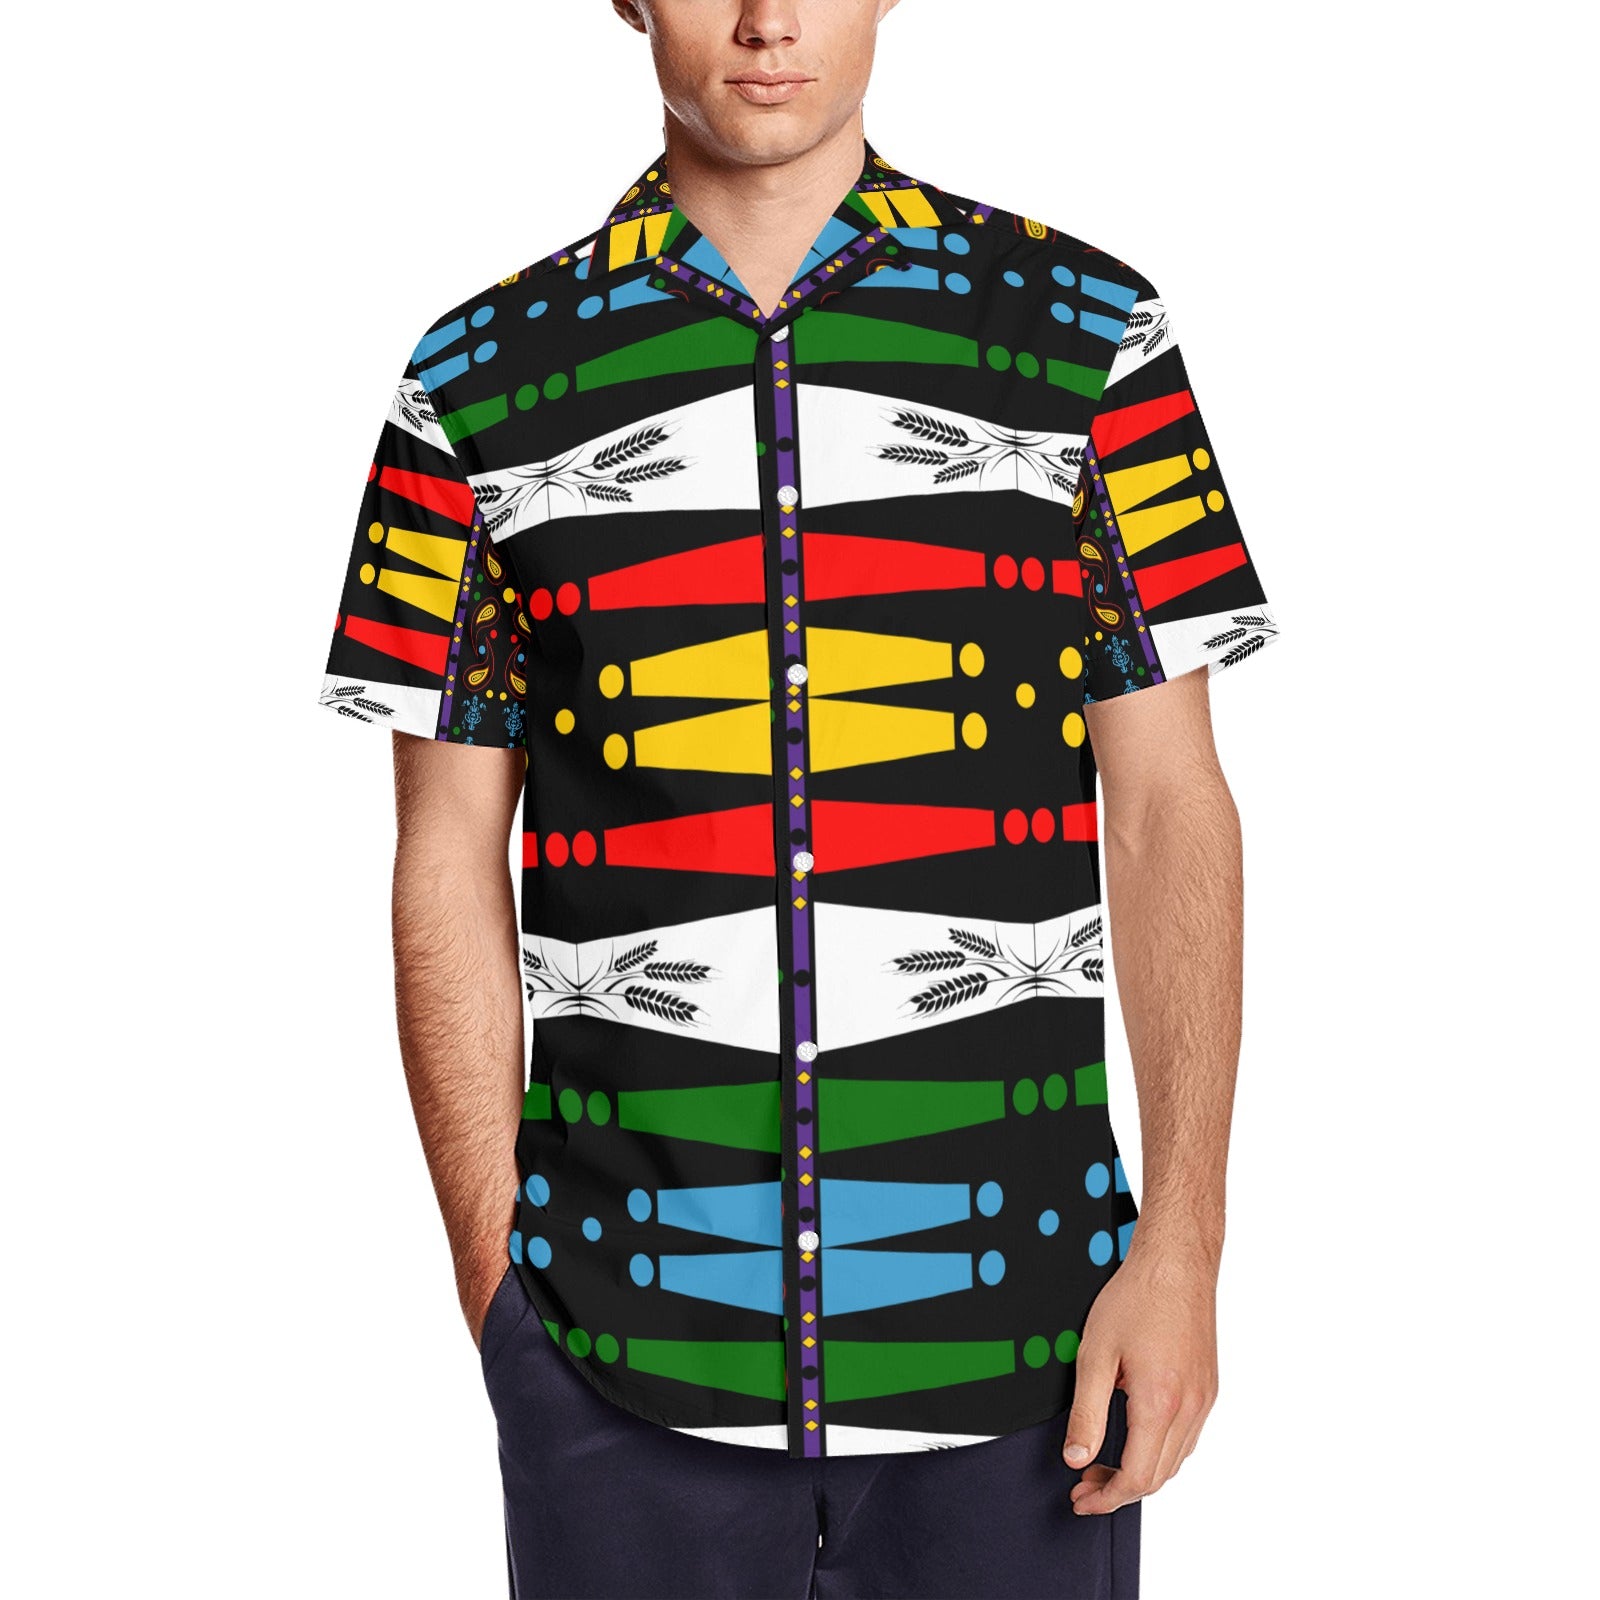 "Native Print" Men's Short Sleeve Shirt With Lapel Collar Print for 2022 By ChuArts